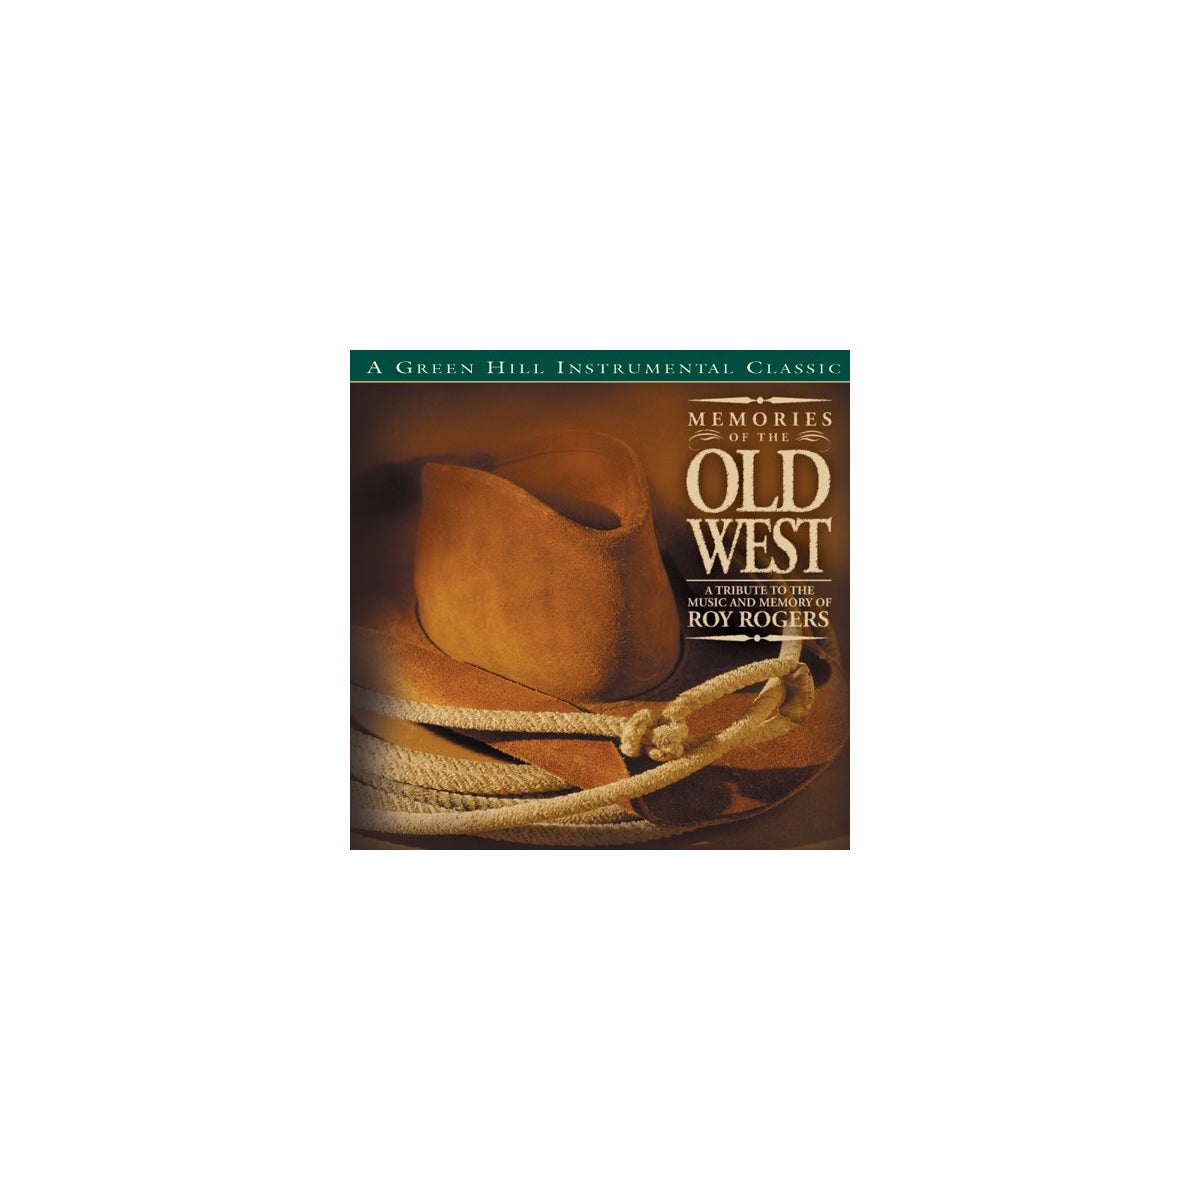 MEMORIES OF THE OLD WEST